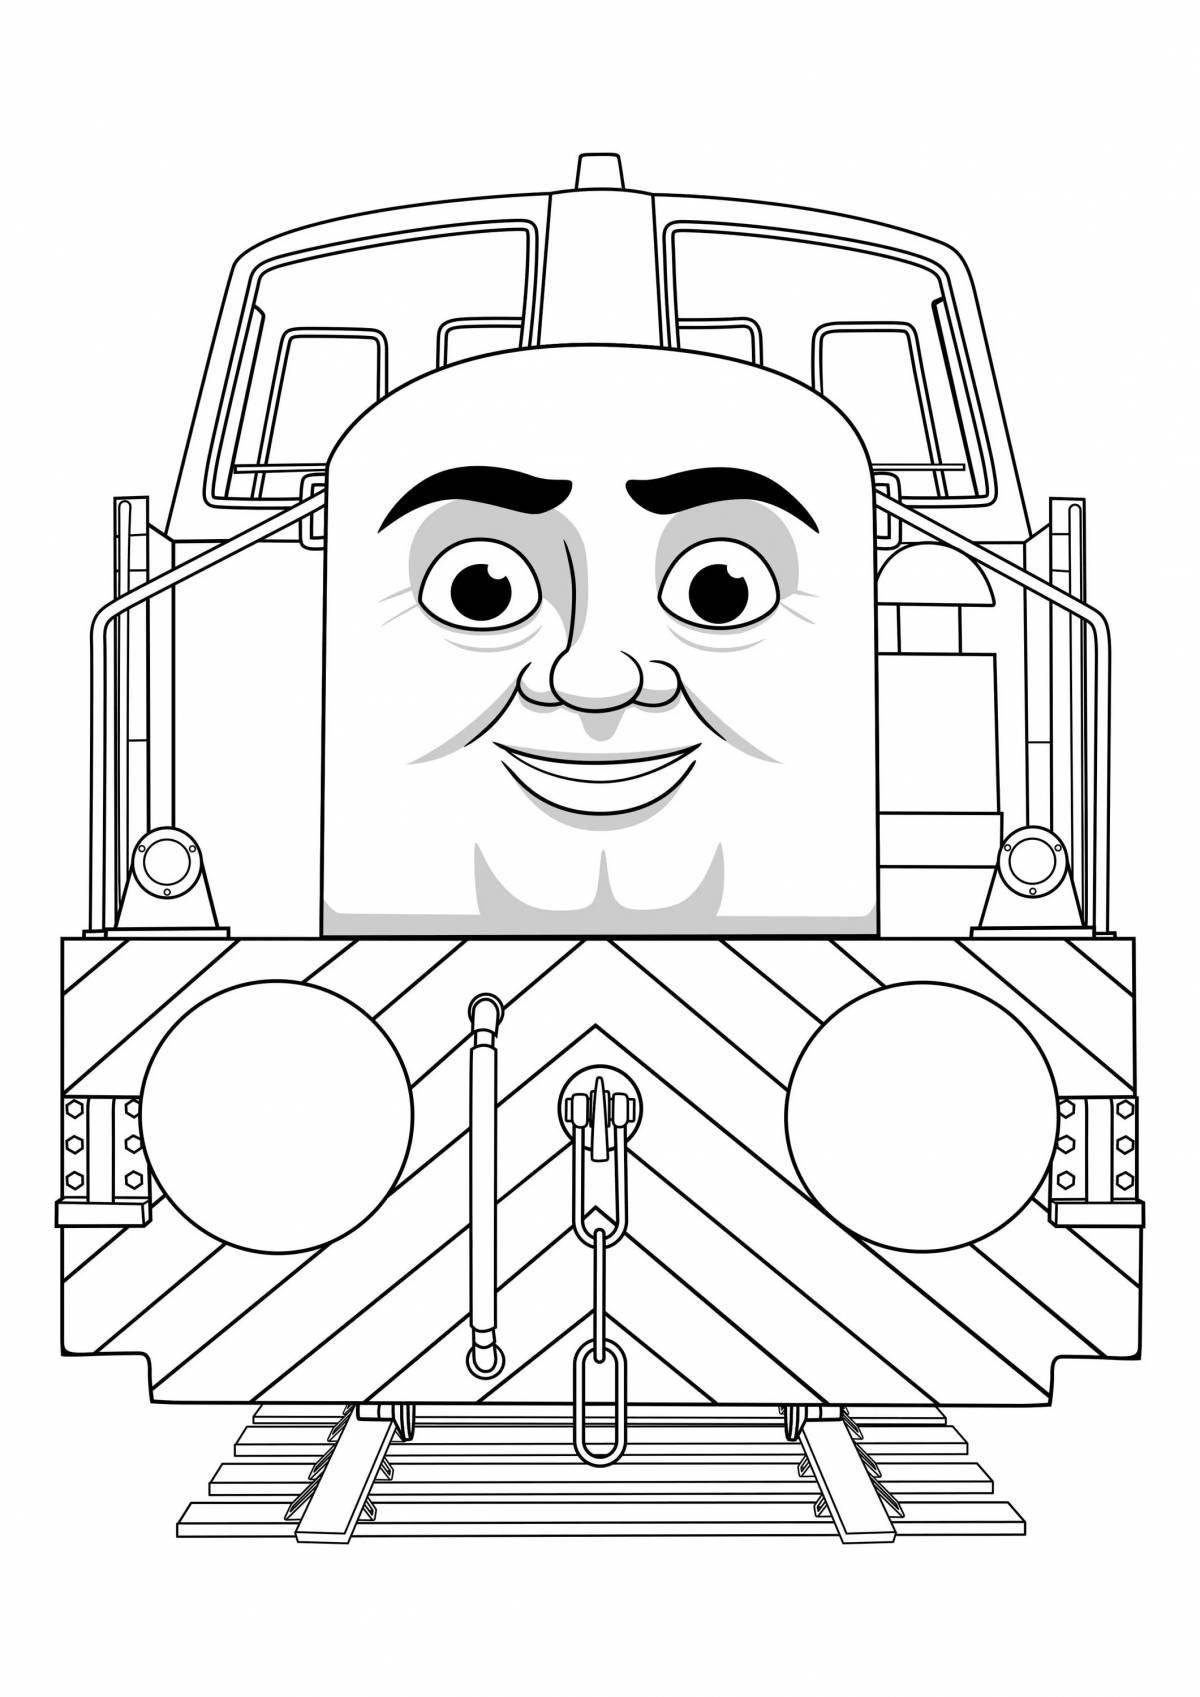 Coloring the amazing thomas the tank engine